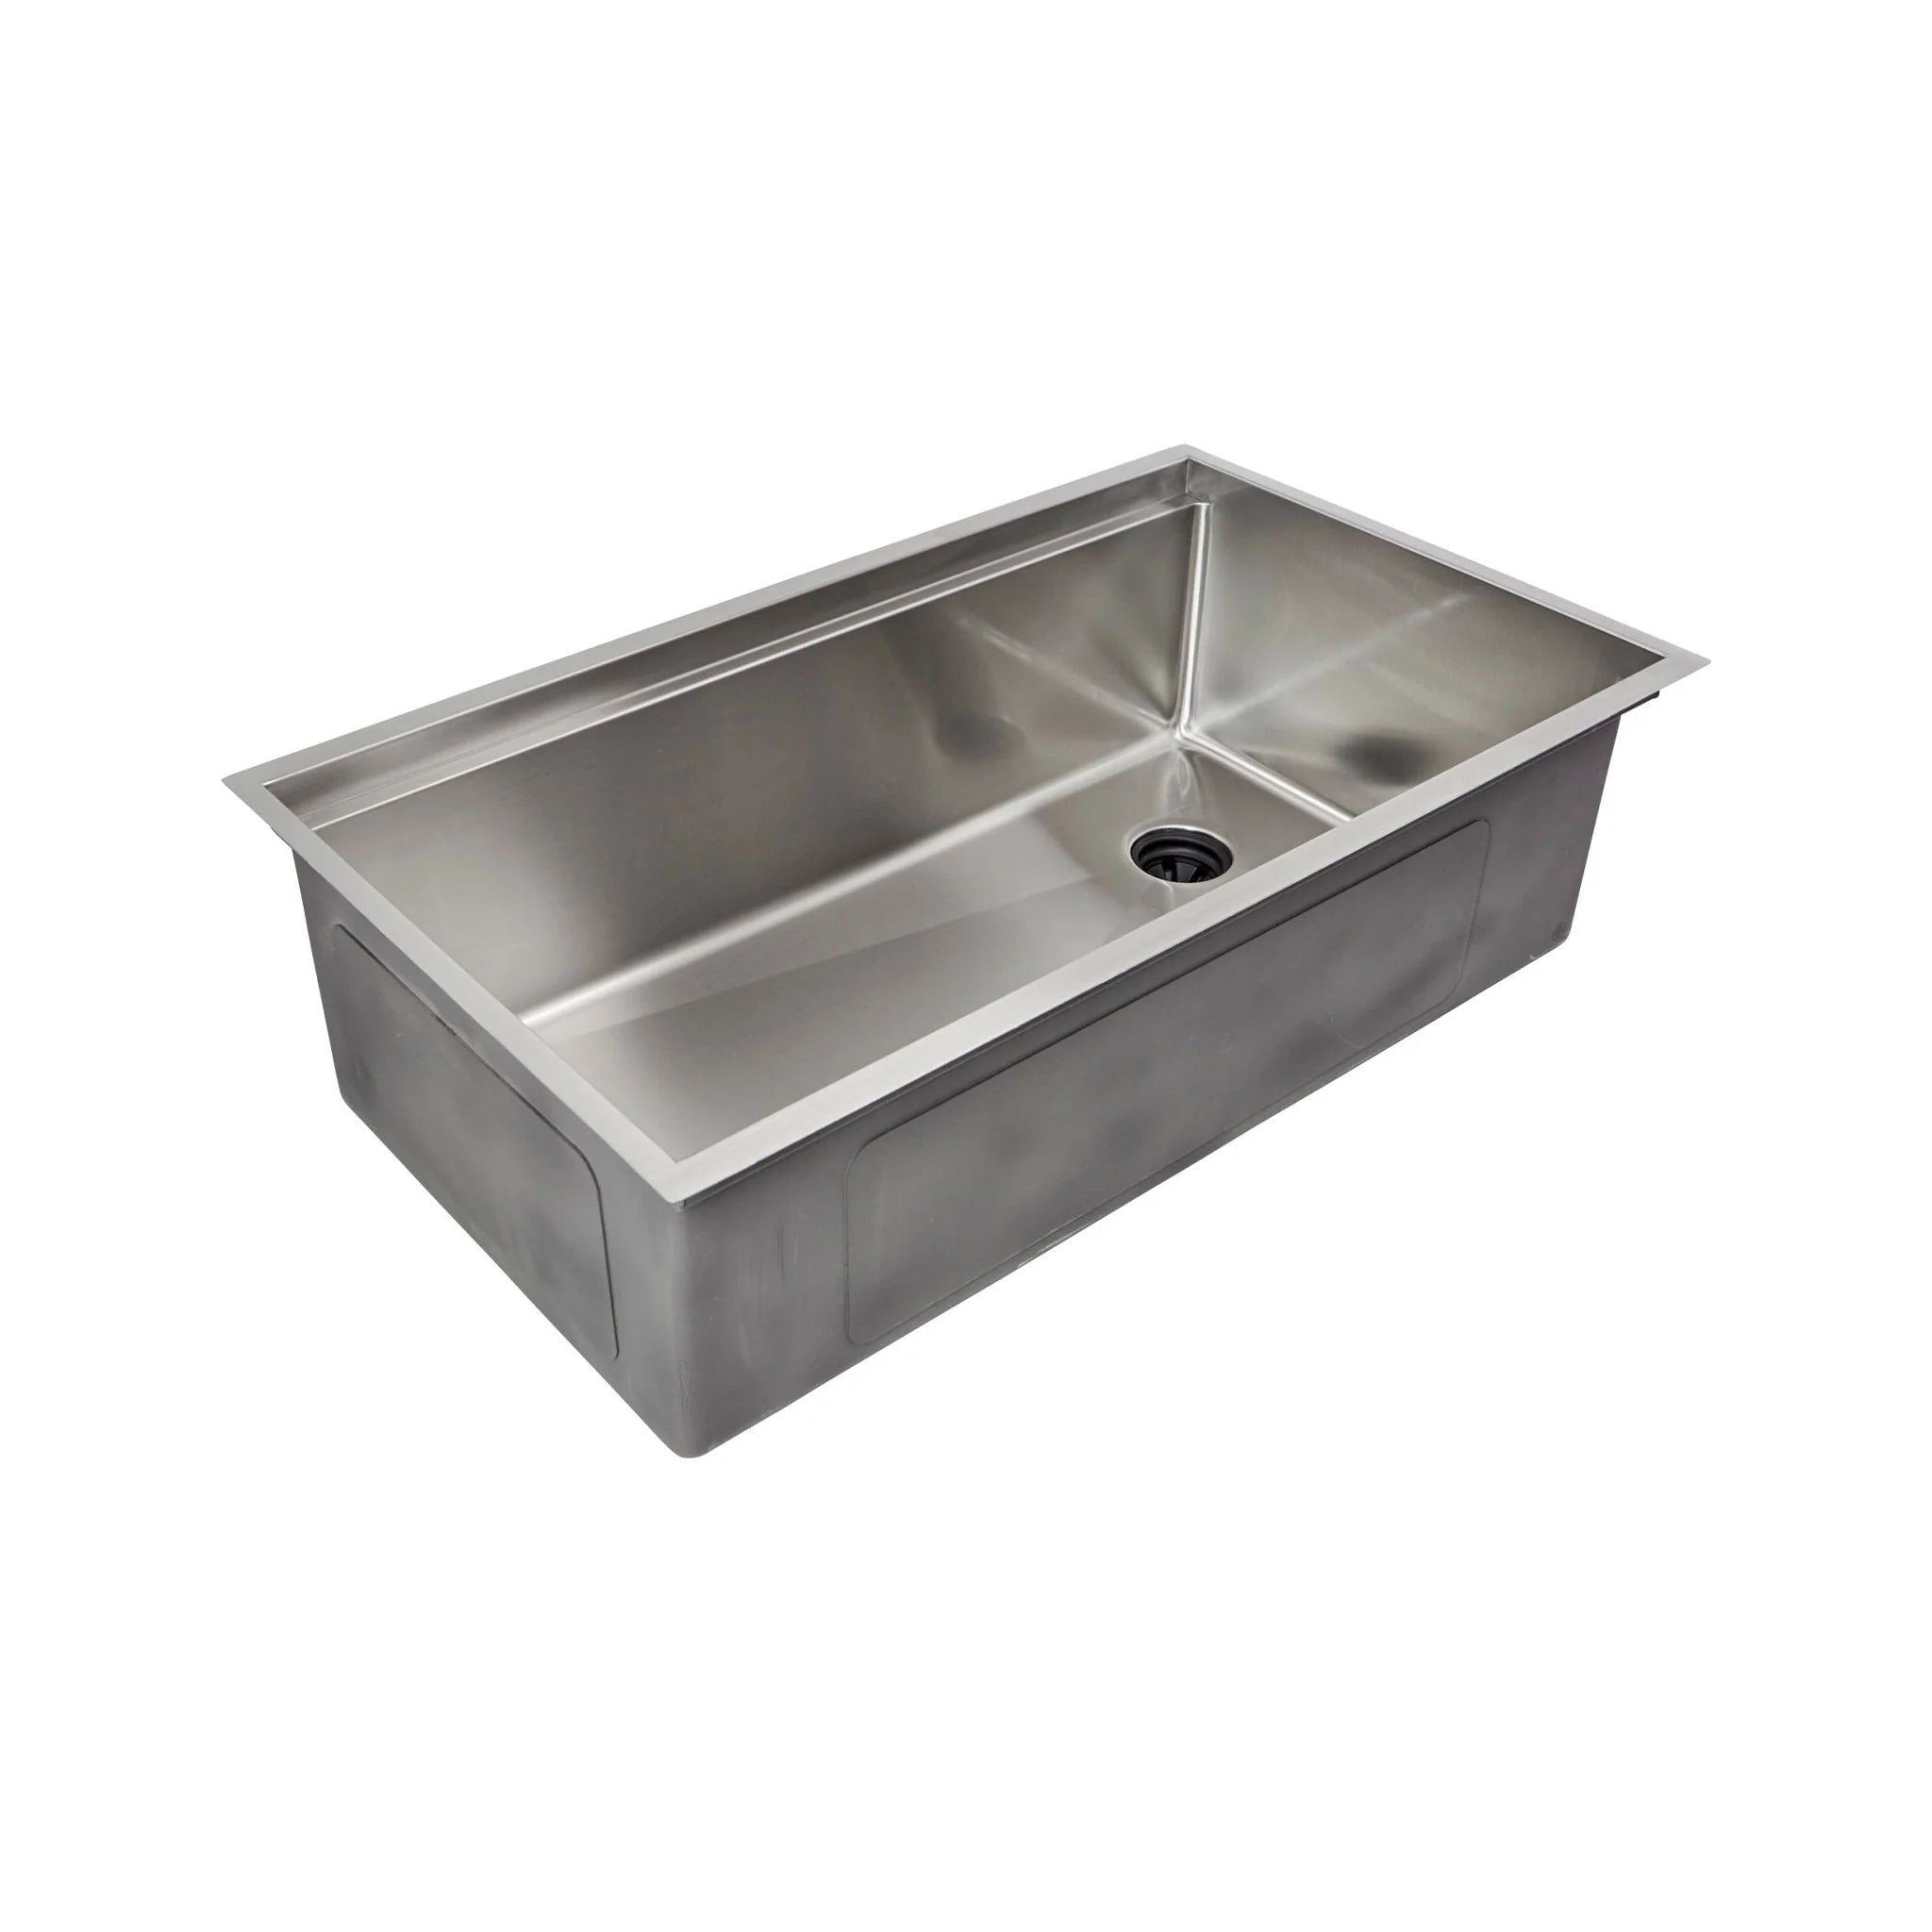 Create Good Sinks’ 33 Inch Workstation sink with a 10 inch depth and underside drain attachment for a seamless drain